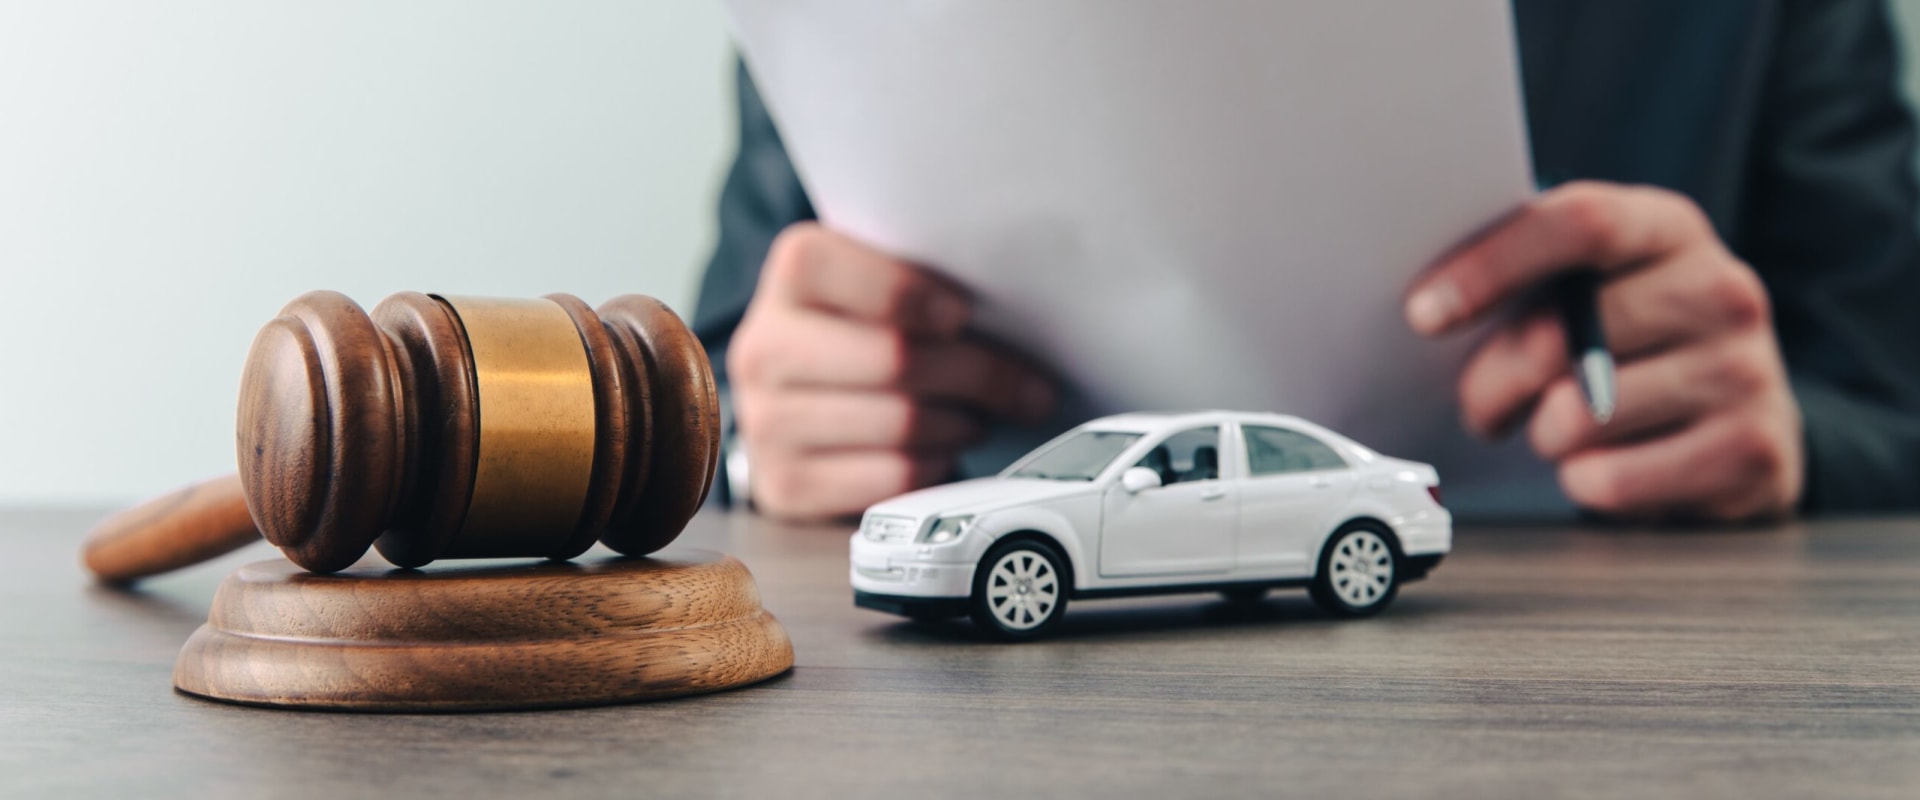 How much does attorney charge for car accident in florida?